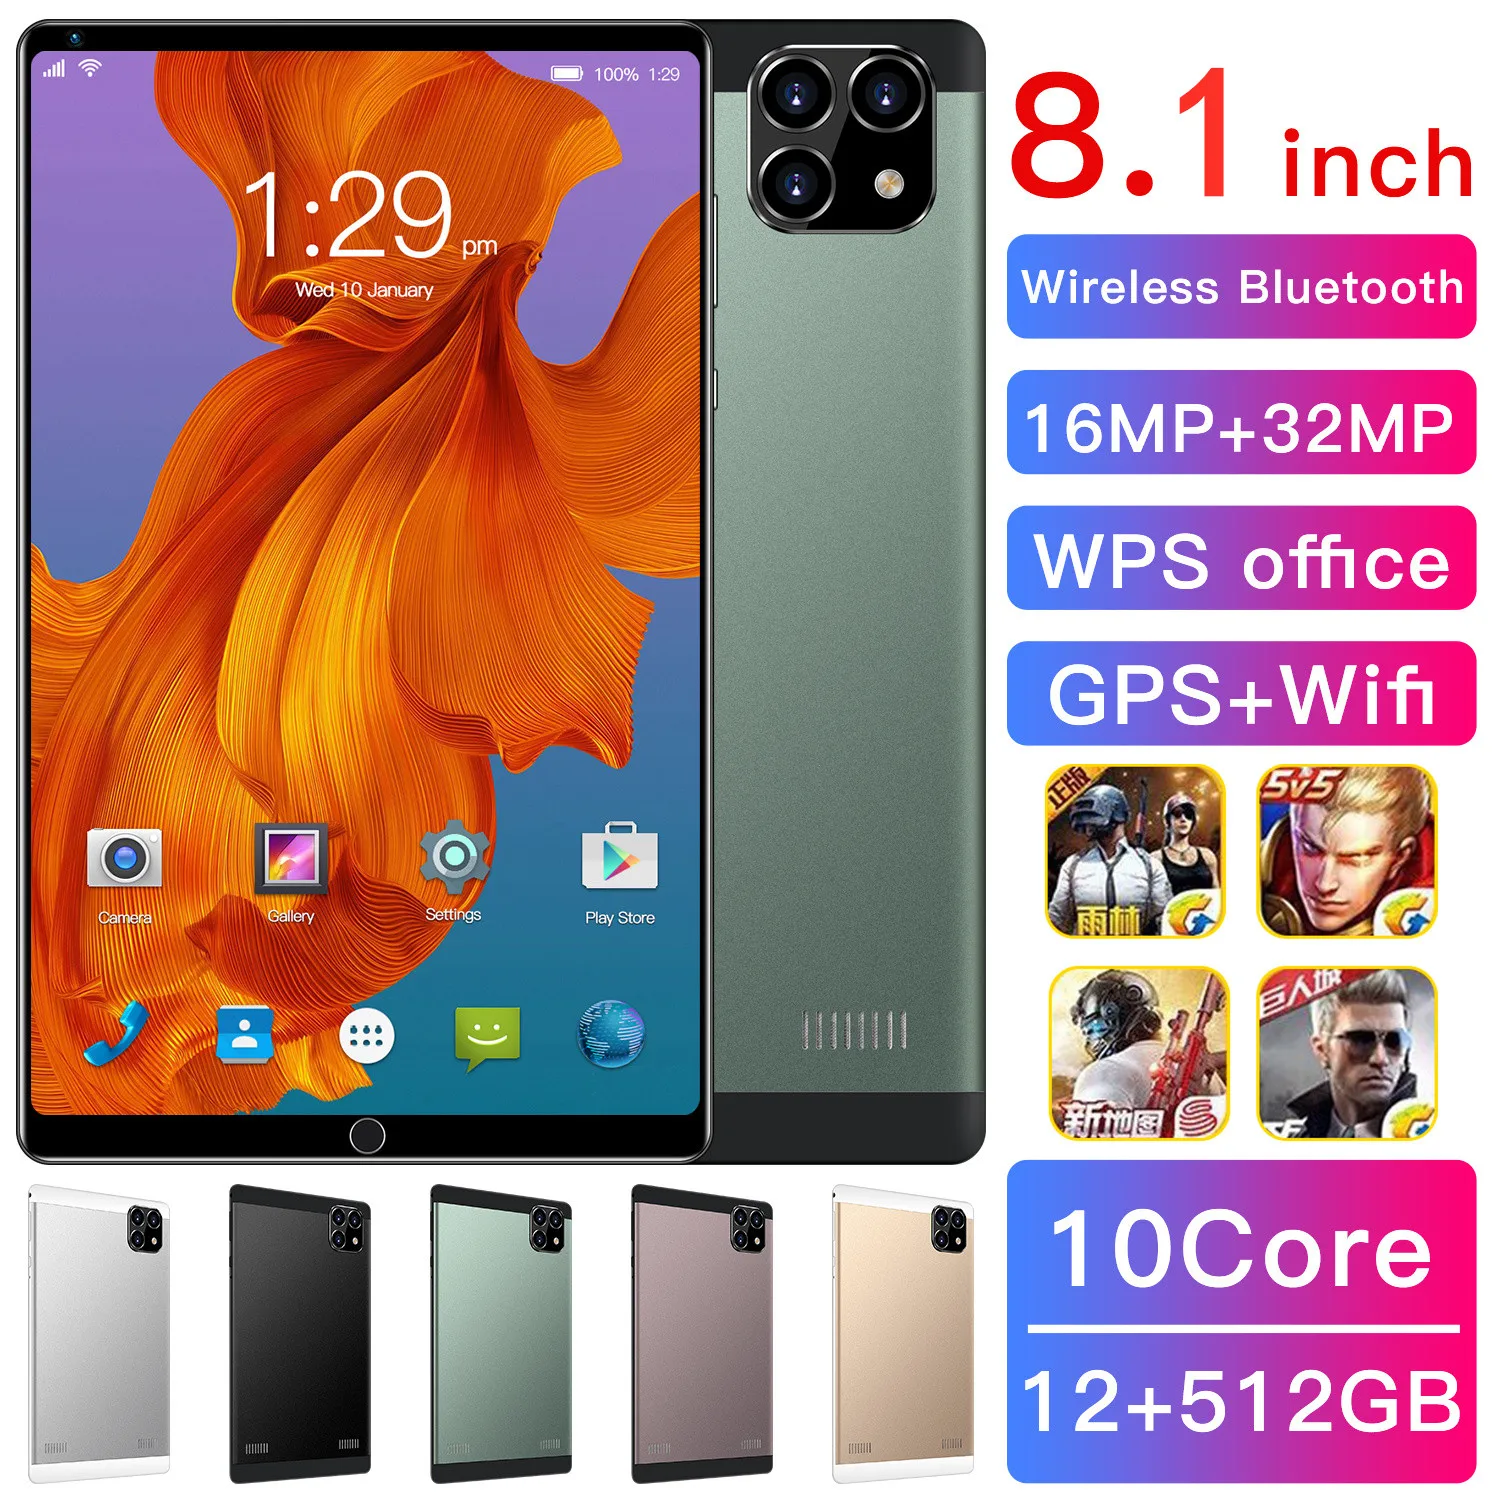 

8.1 inch Tablet equipped with Android 9.0 octa-core processor Google Play GPS and WIFI phone Wi-Fi and Bluetooth brand new